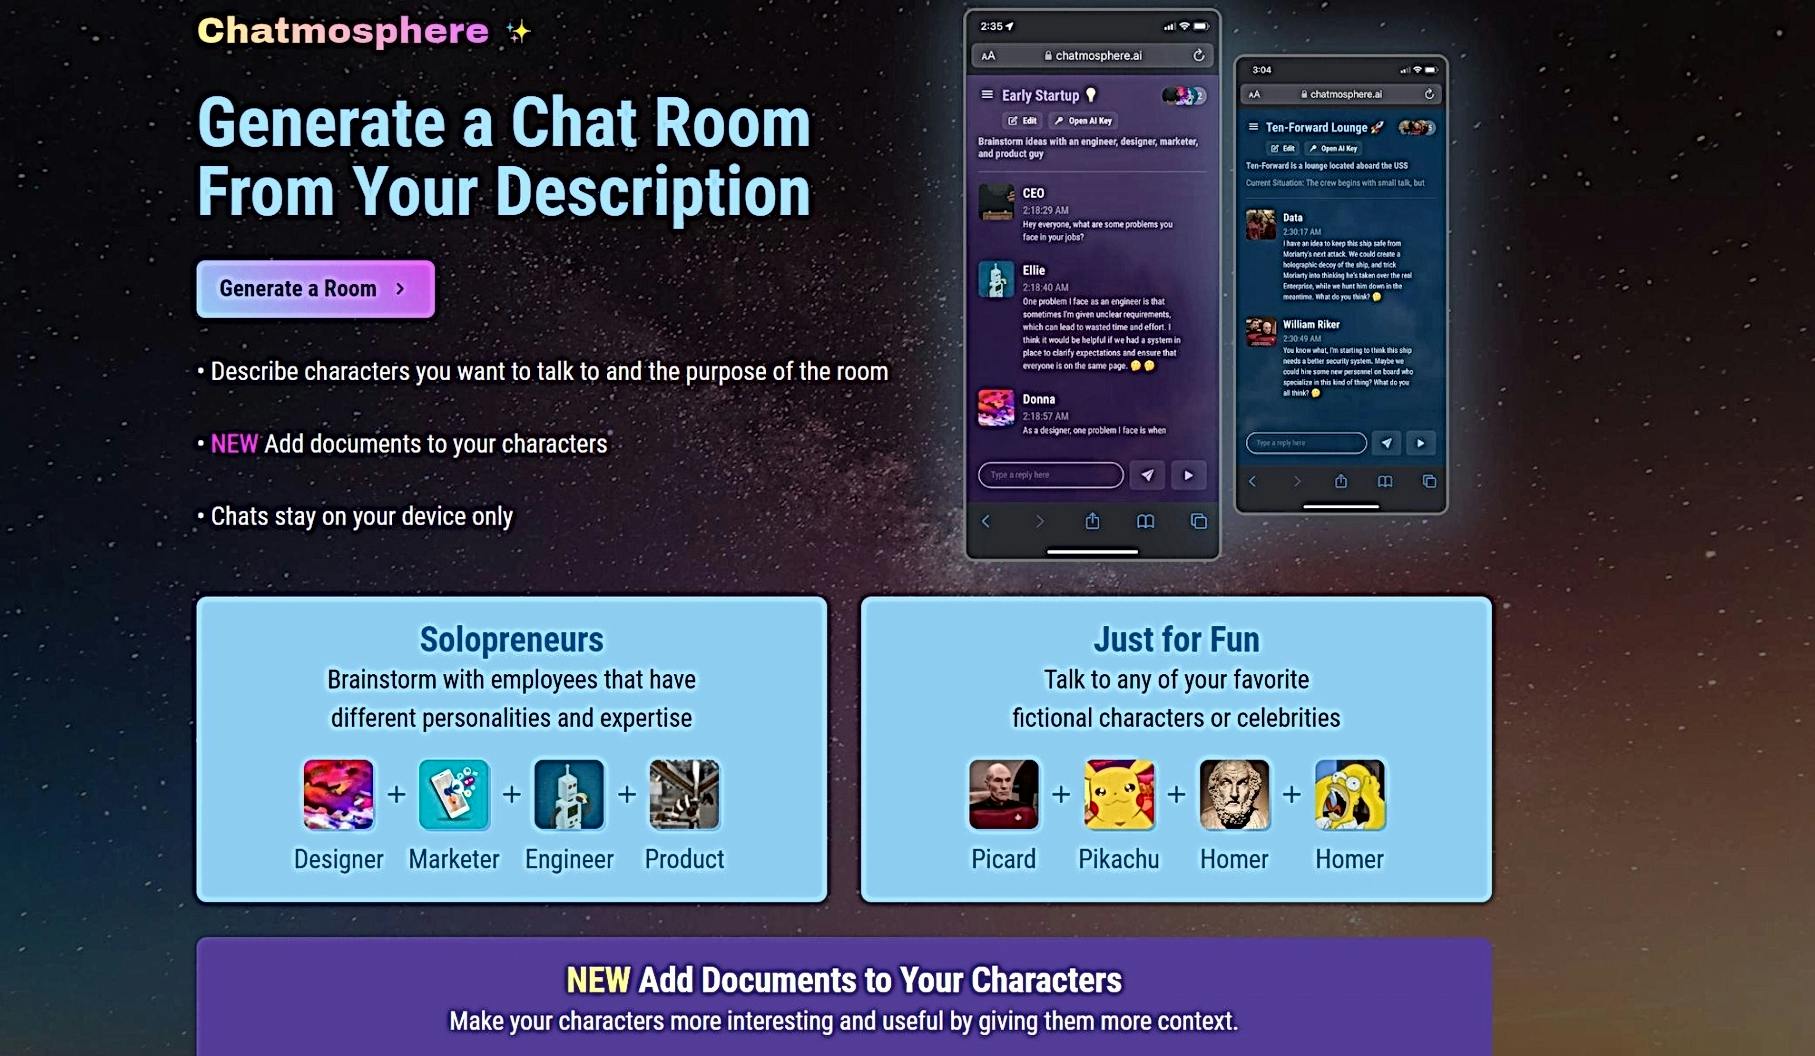 Chatmosphere featured